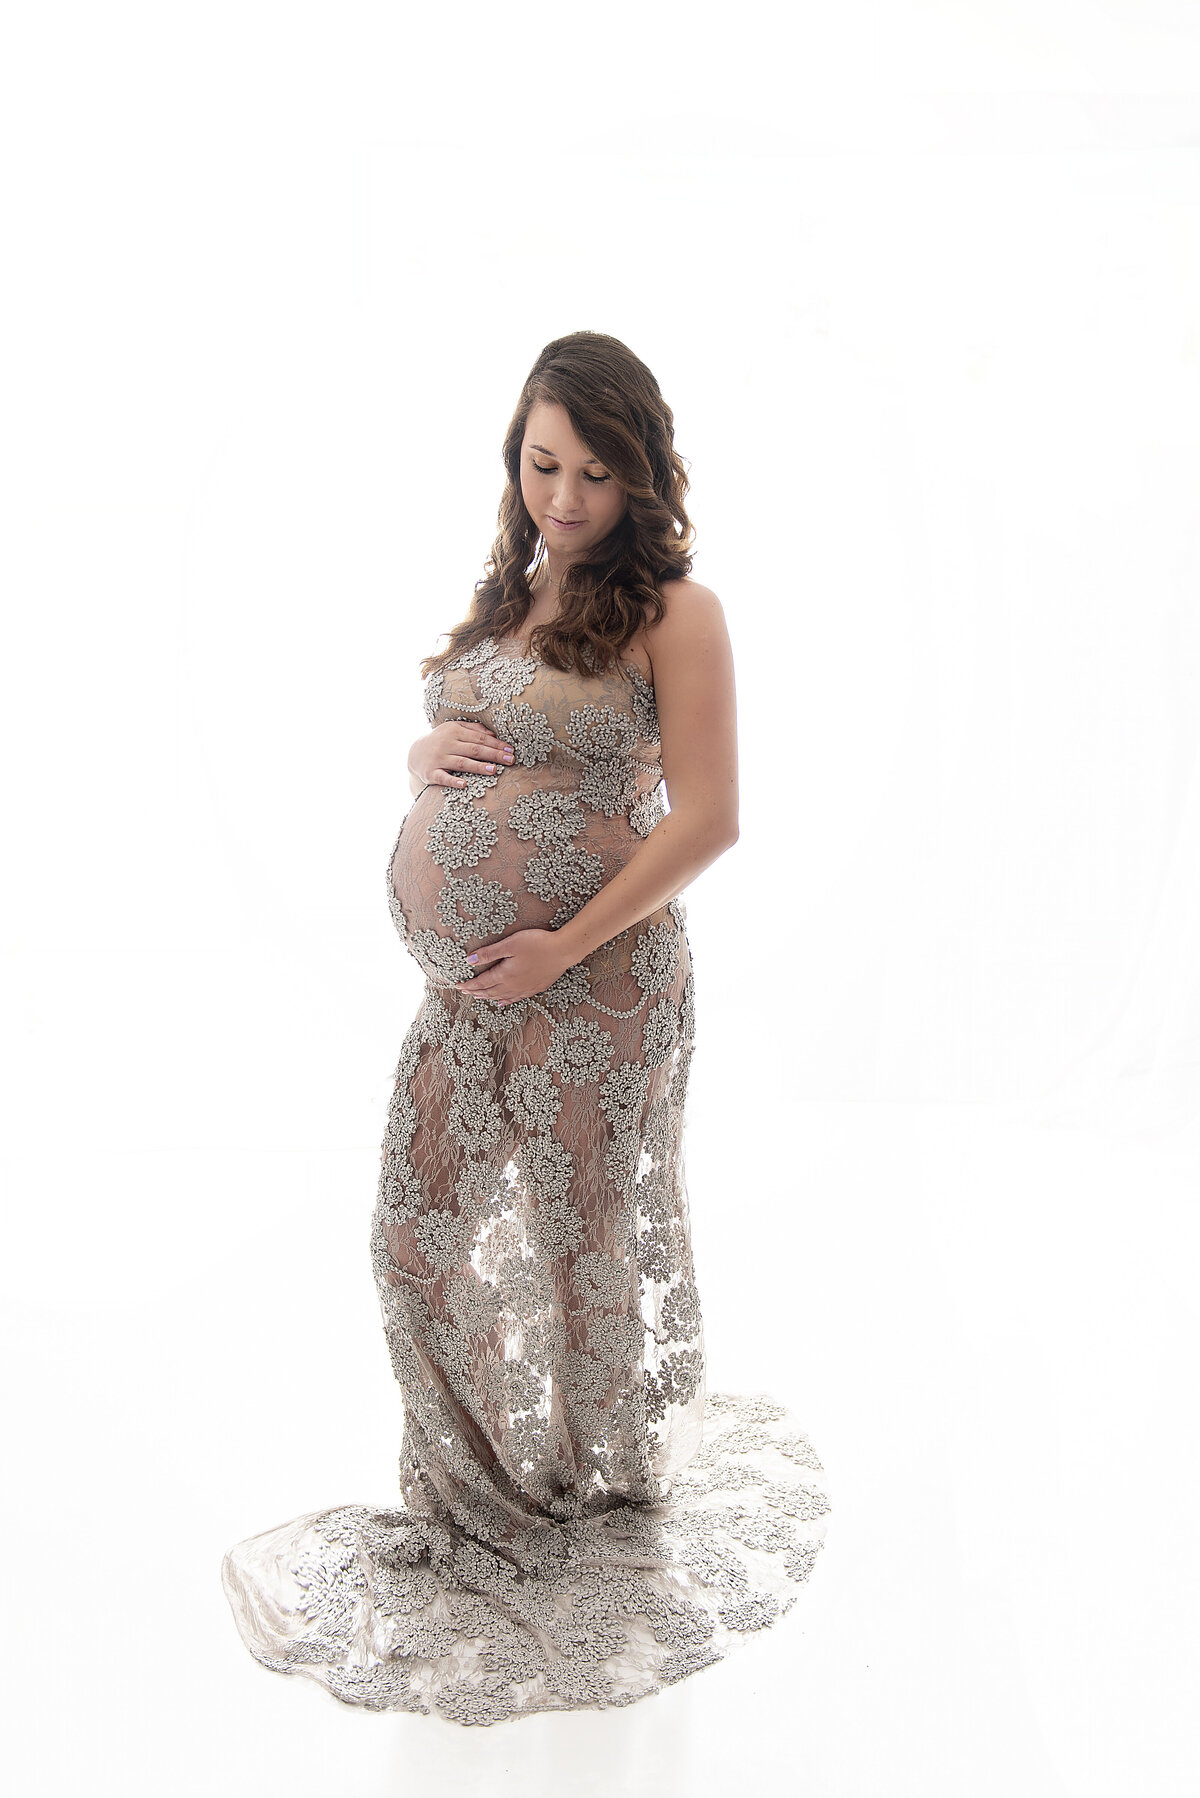 A mother to be stands in an Atlanta Maternity Photographer studio wearing a gray lace maternity gown